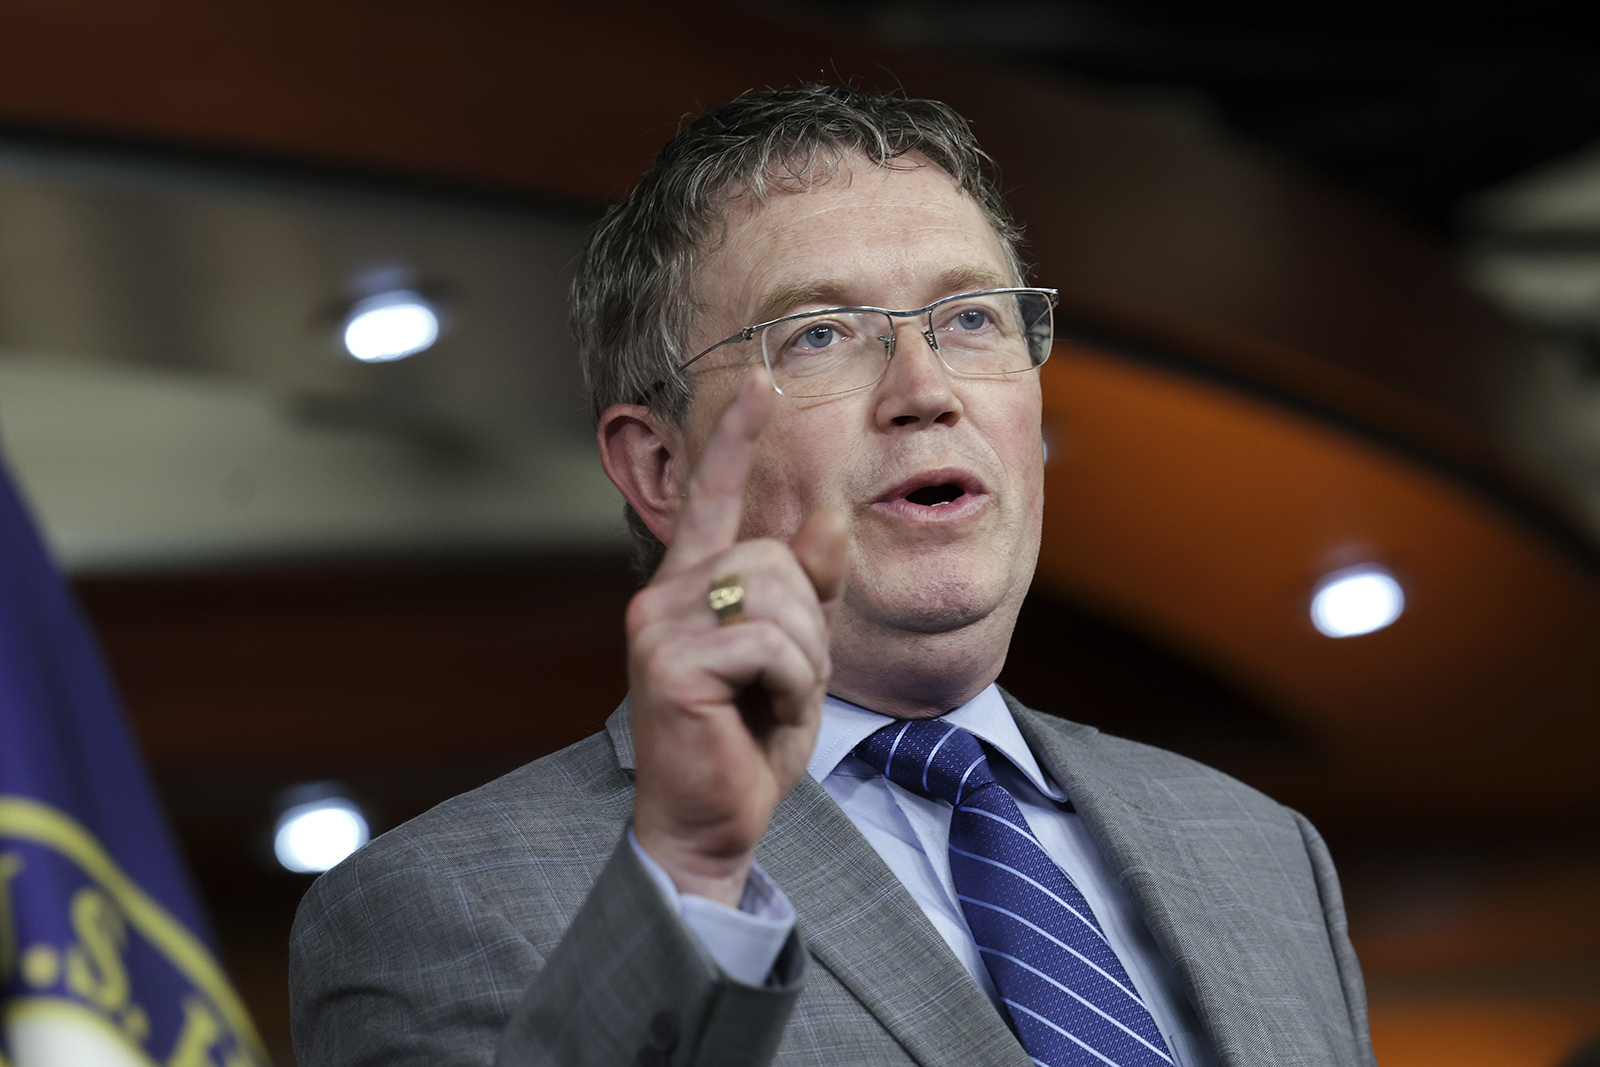 U.S. Rep. Thomas Massie (R-KY) at a House Second Amendment Caucus press conference at the U.S. Capitol on June 08, 2022.